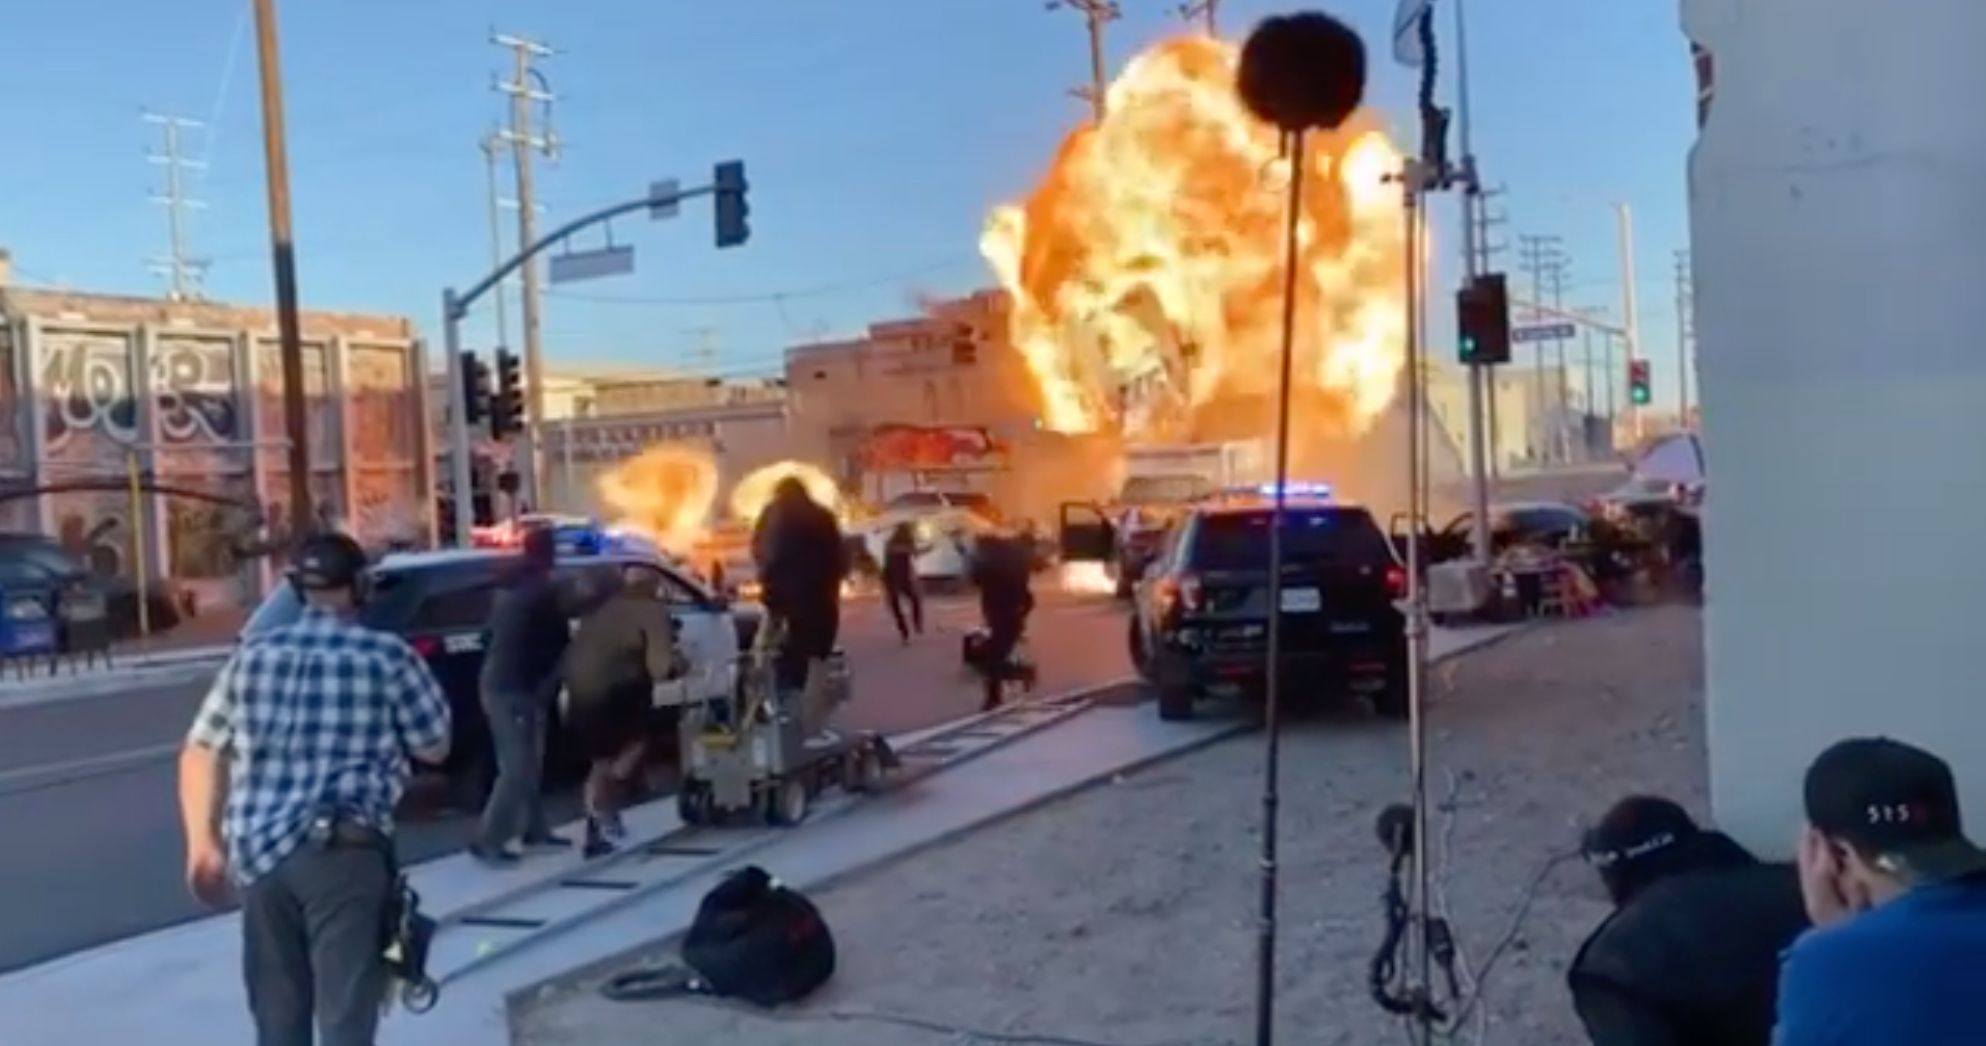 Michael Bay Shares Explosive First Look at New Action Thriller Ambulance